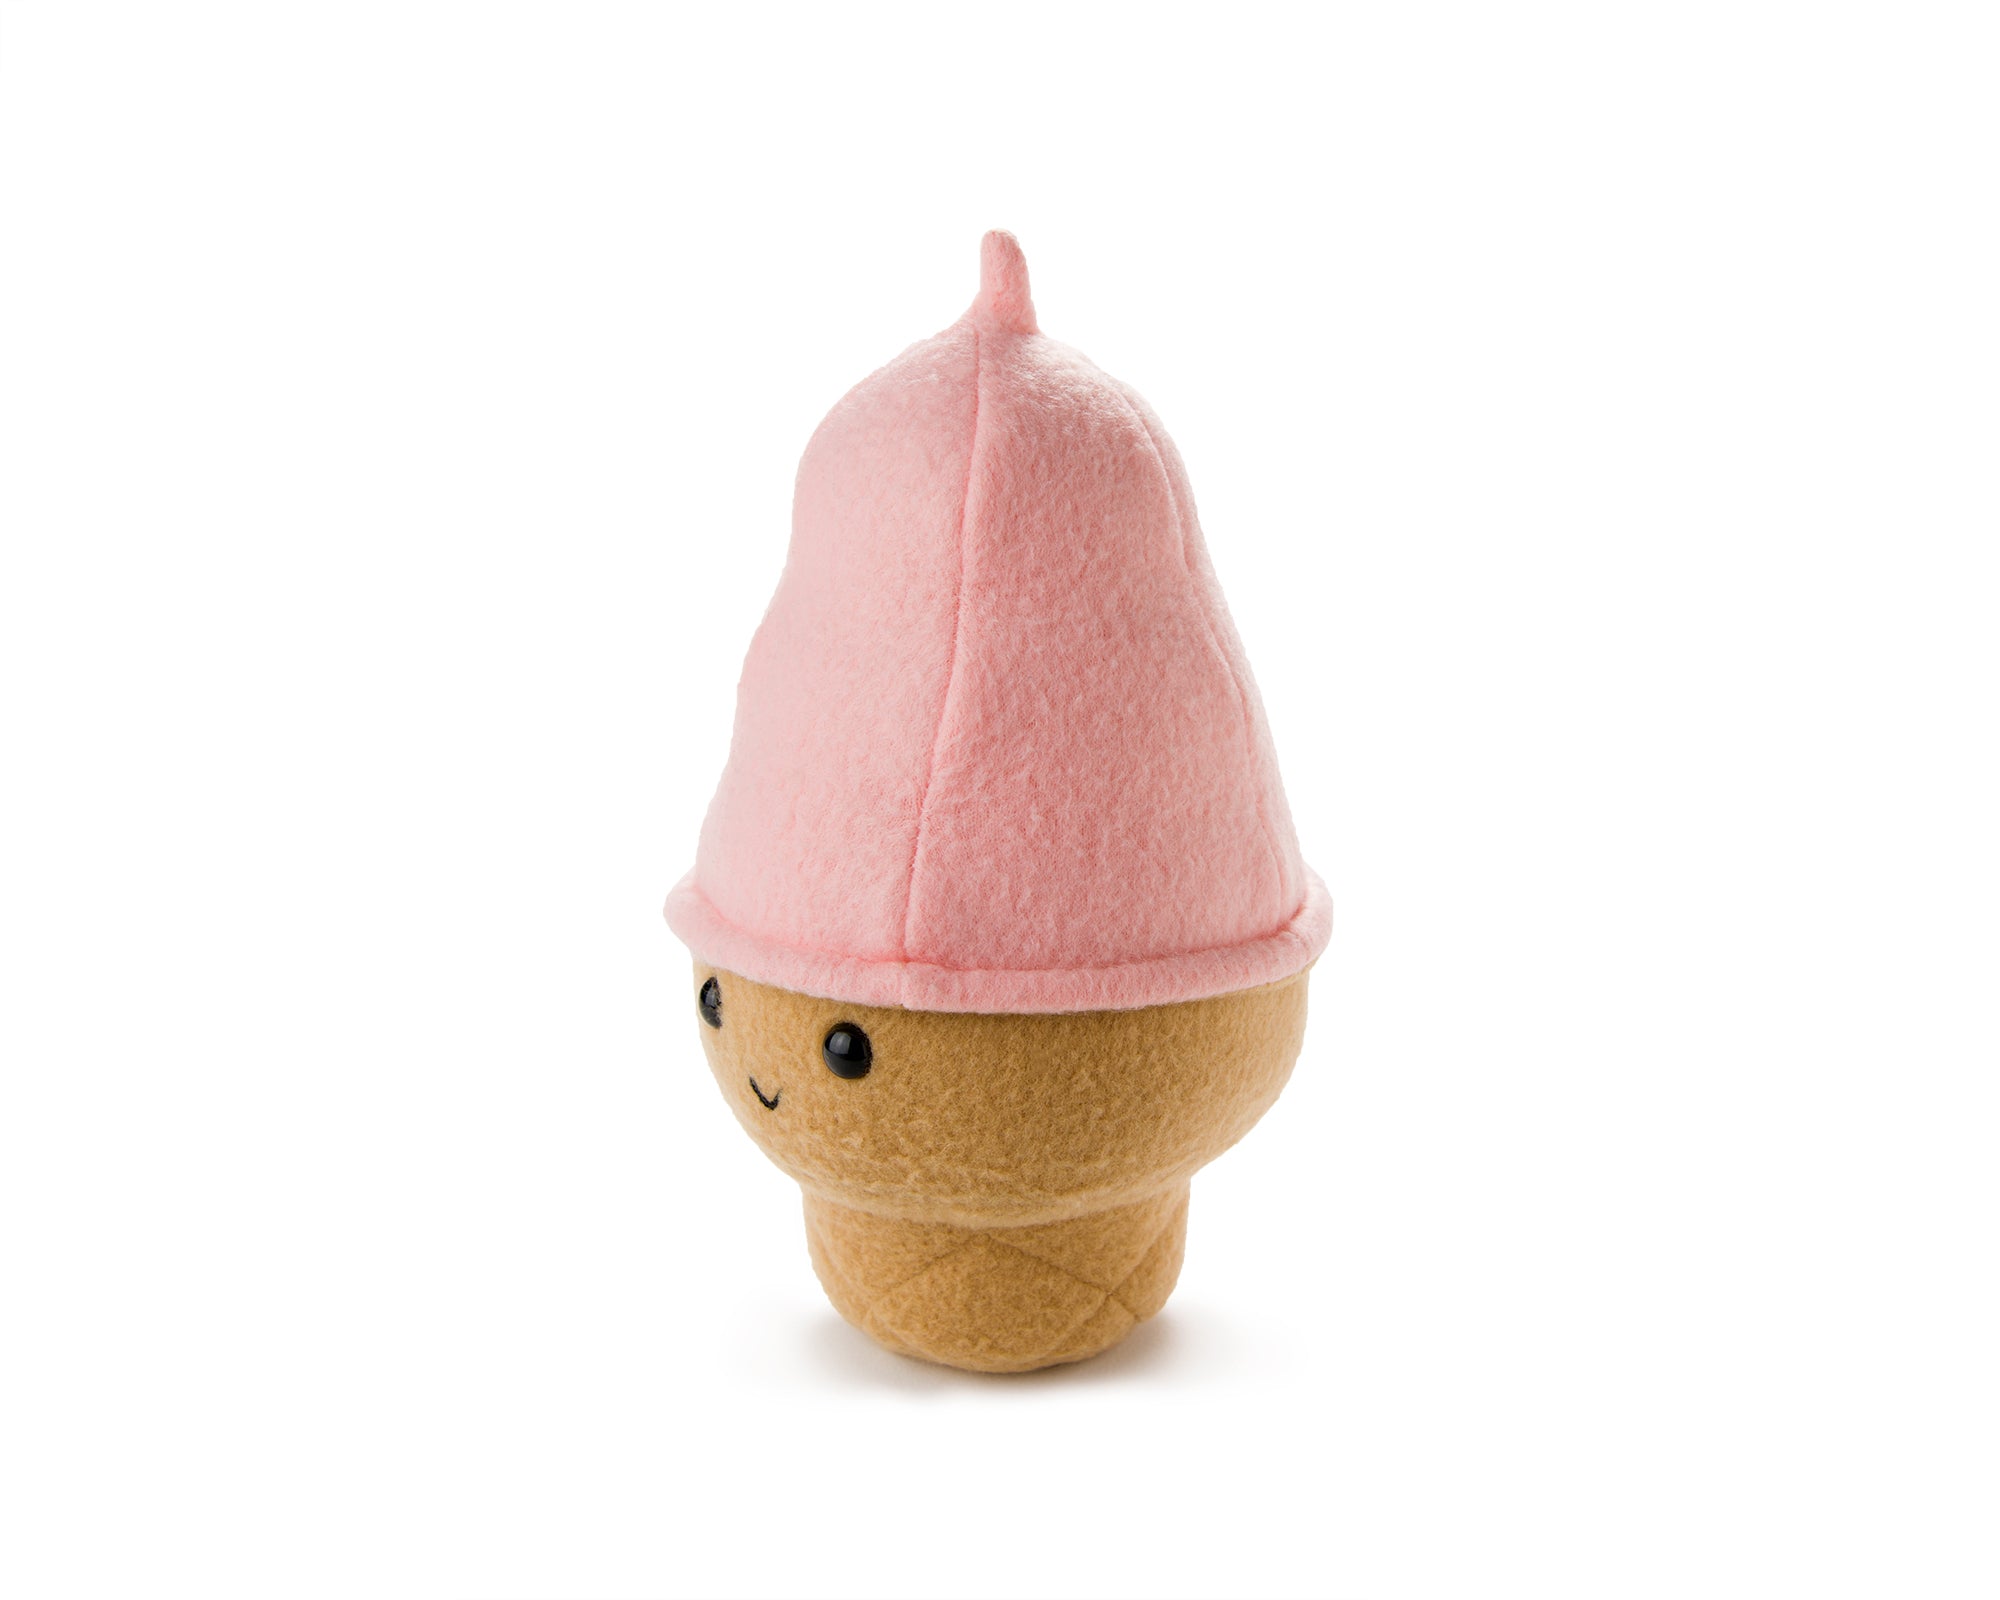 Stacey the Ice Cream Sewing Pattern